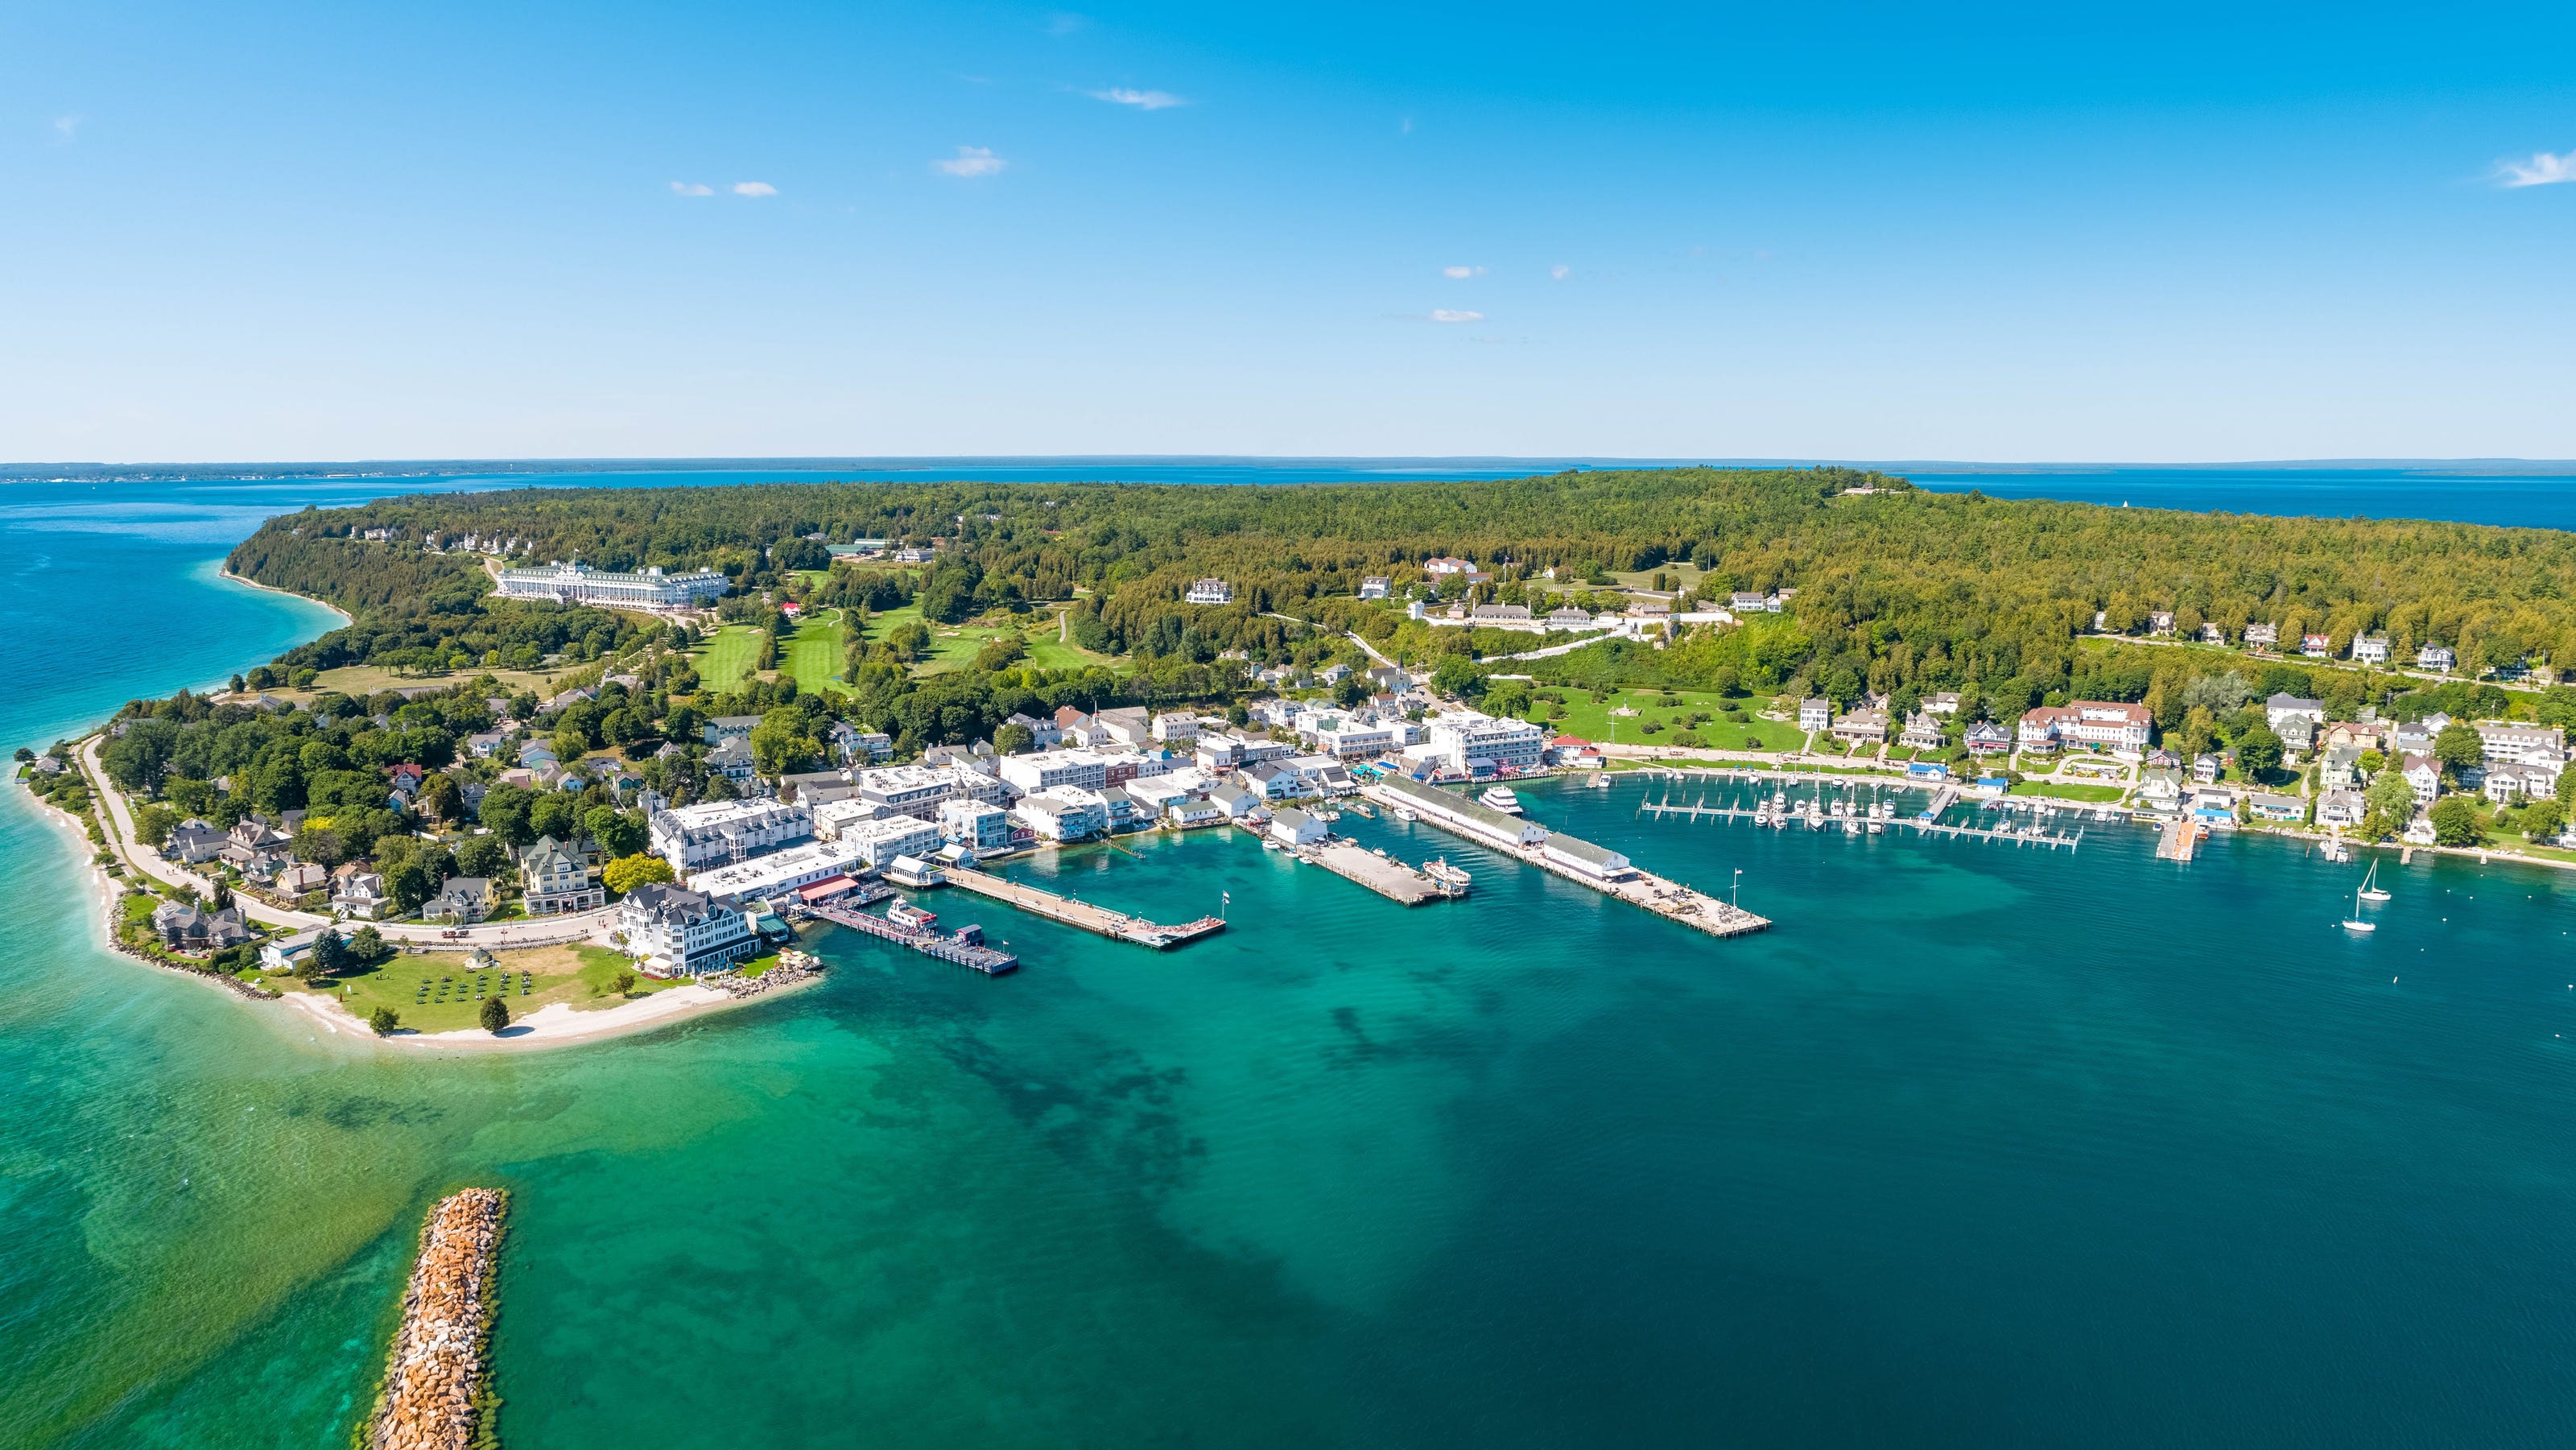 Mackinac Island looks to reopen ‘right’ way with season to truly begin